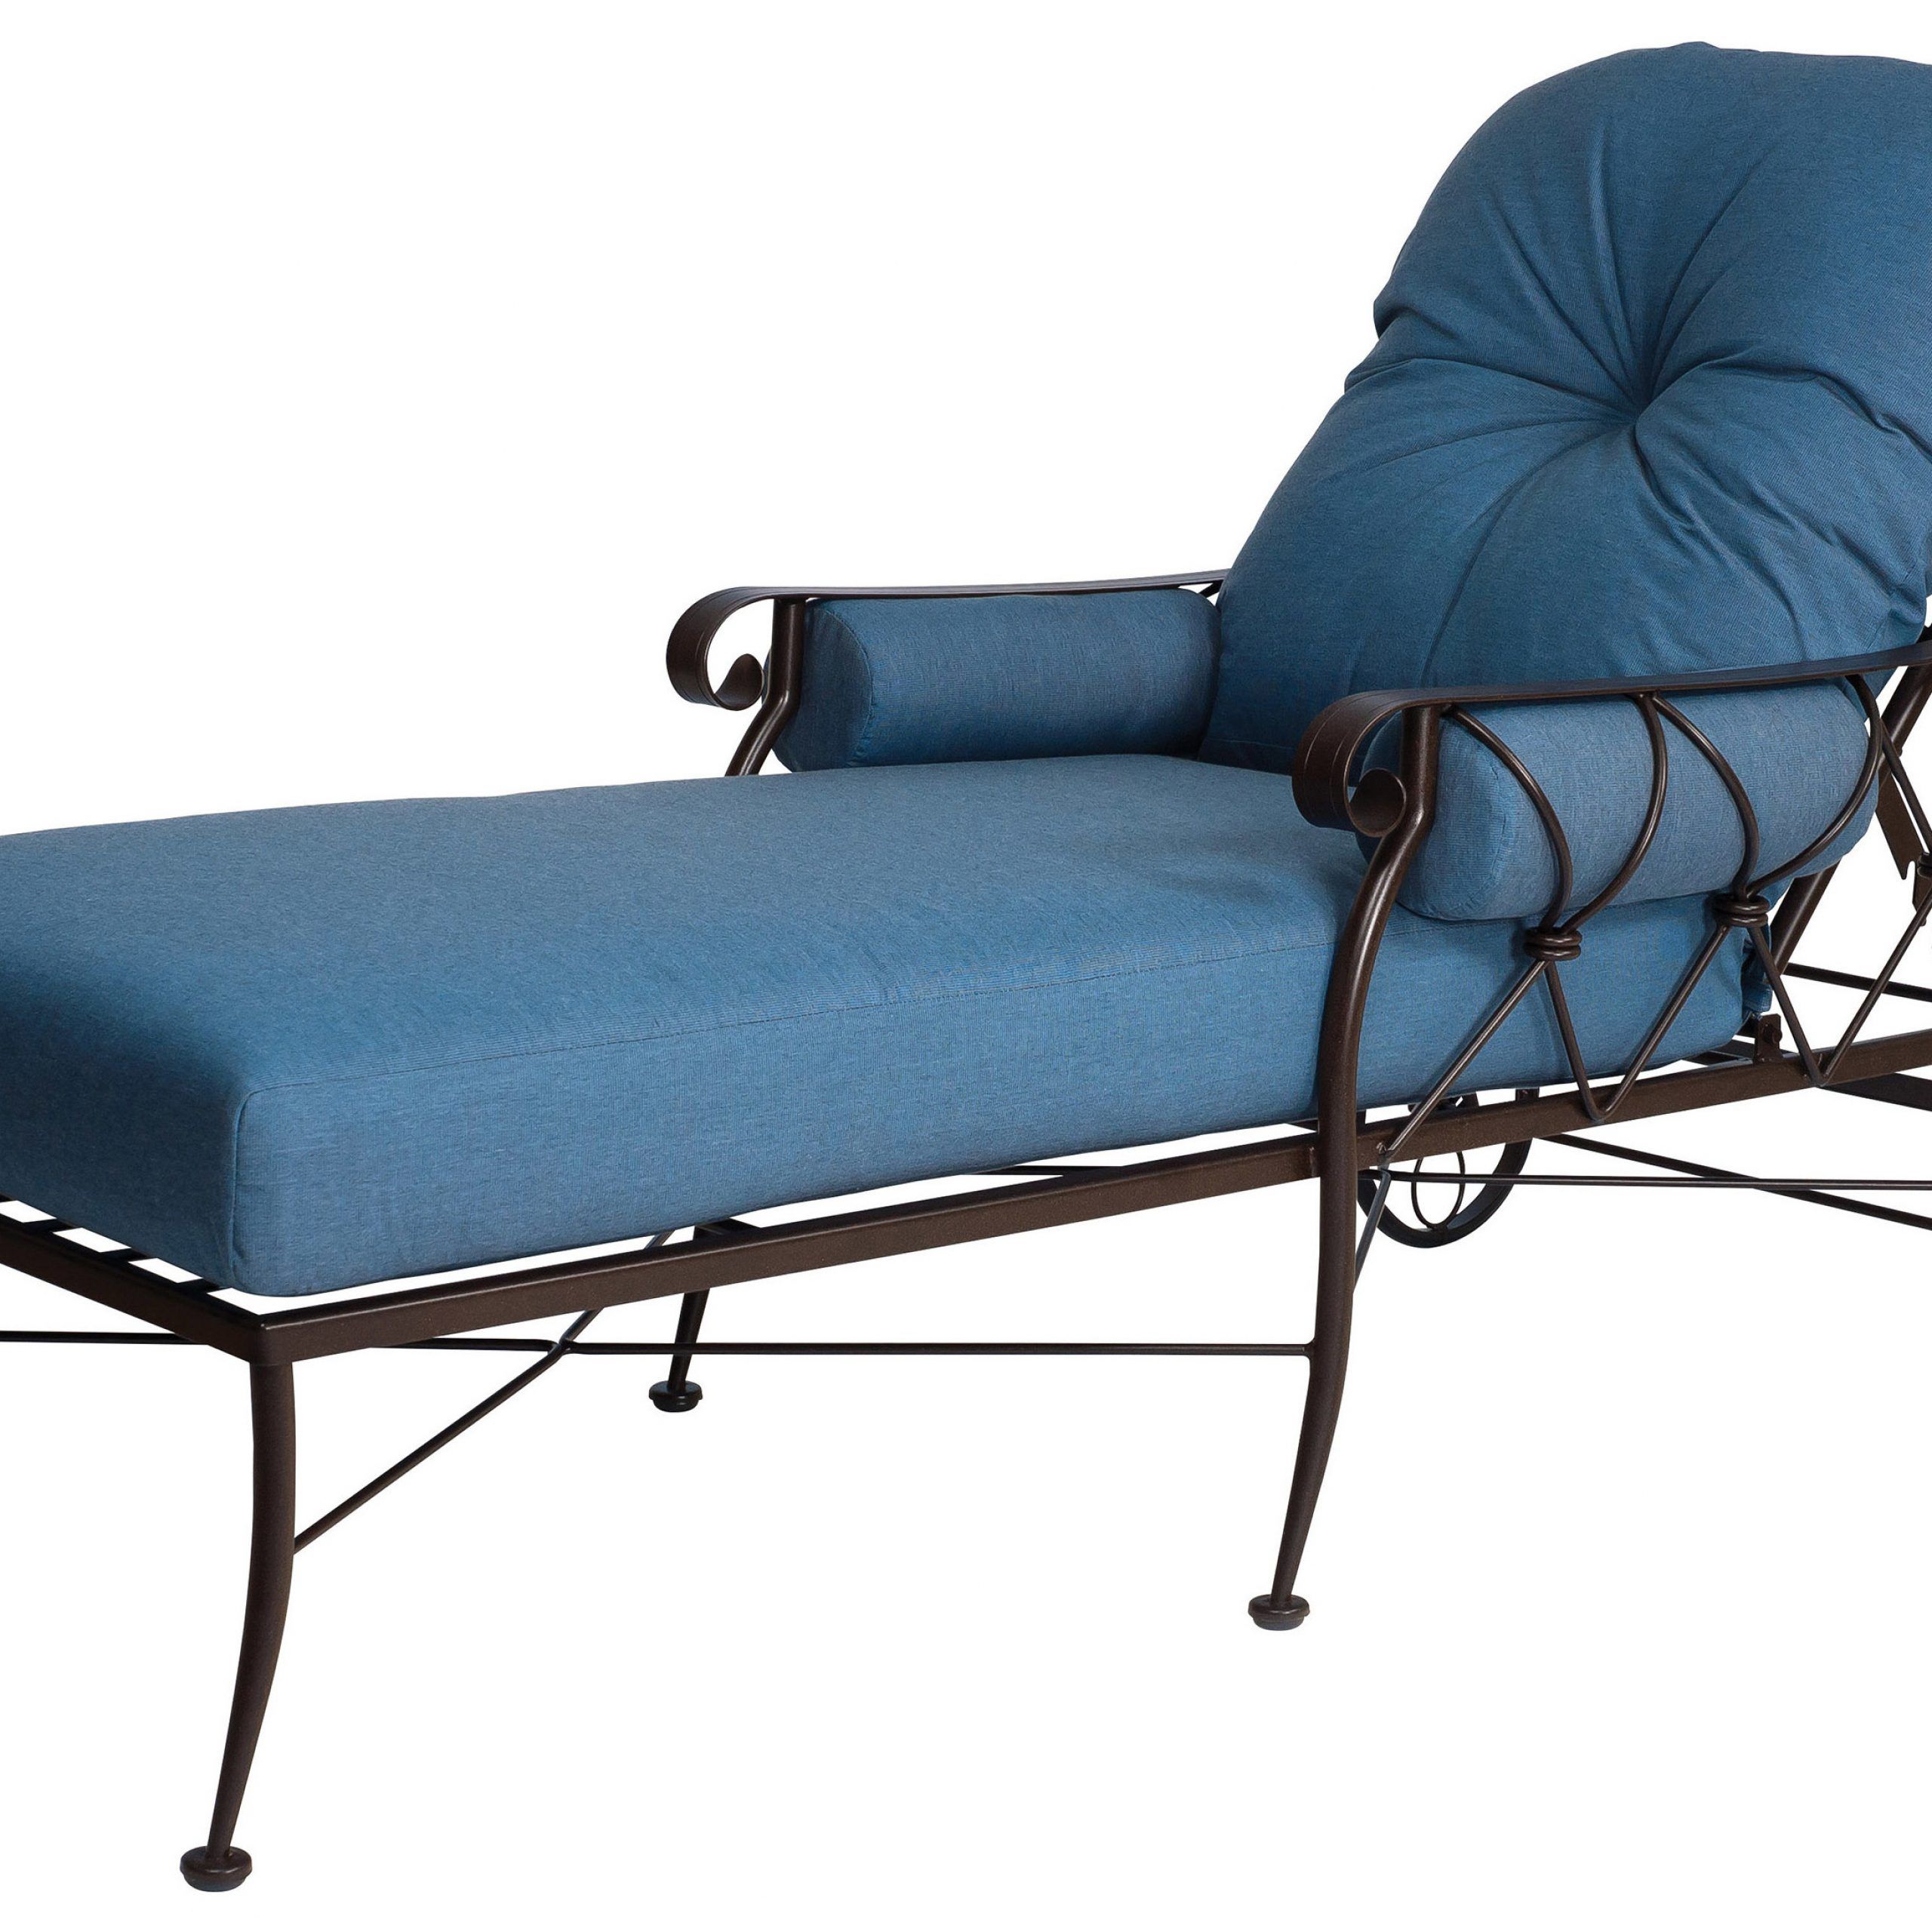 Wrought Iron Outdoor Chaise Lounge Chairs : Woodard Bradford Adjustable With Regard To Most Popular Steel Arm Outdoor Aluminum Chaise Sets (View 4 of 15)